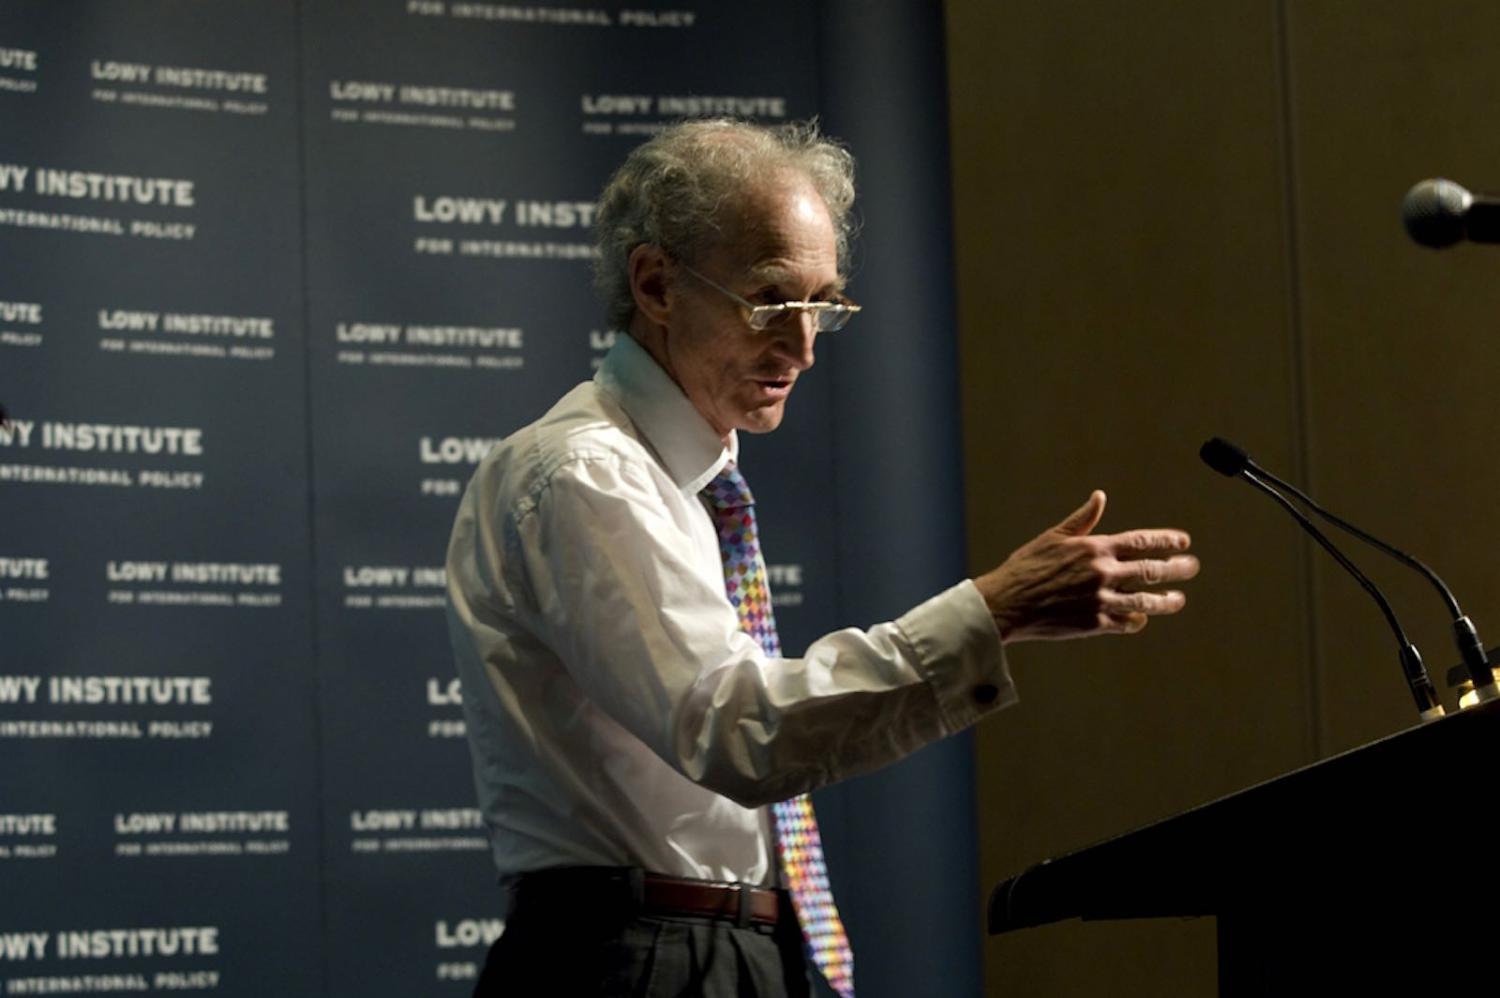 Lord Robert of Oxford, Bob May as he preferred, delivering the 2007 Lowy Lecture